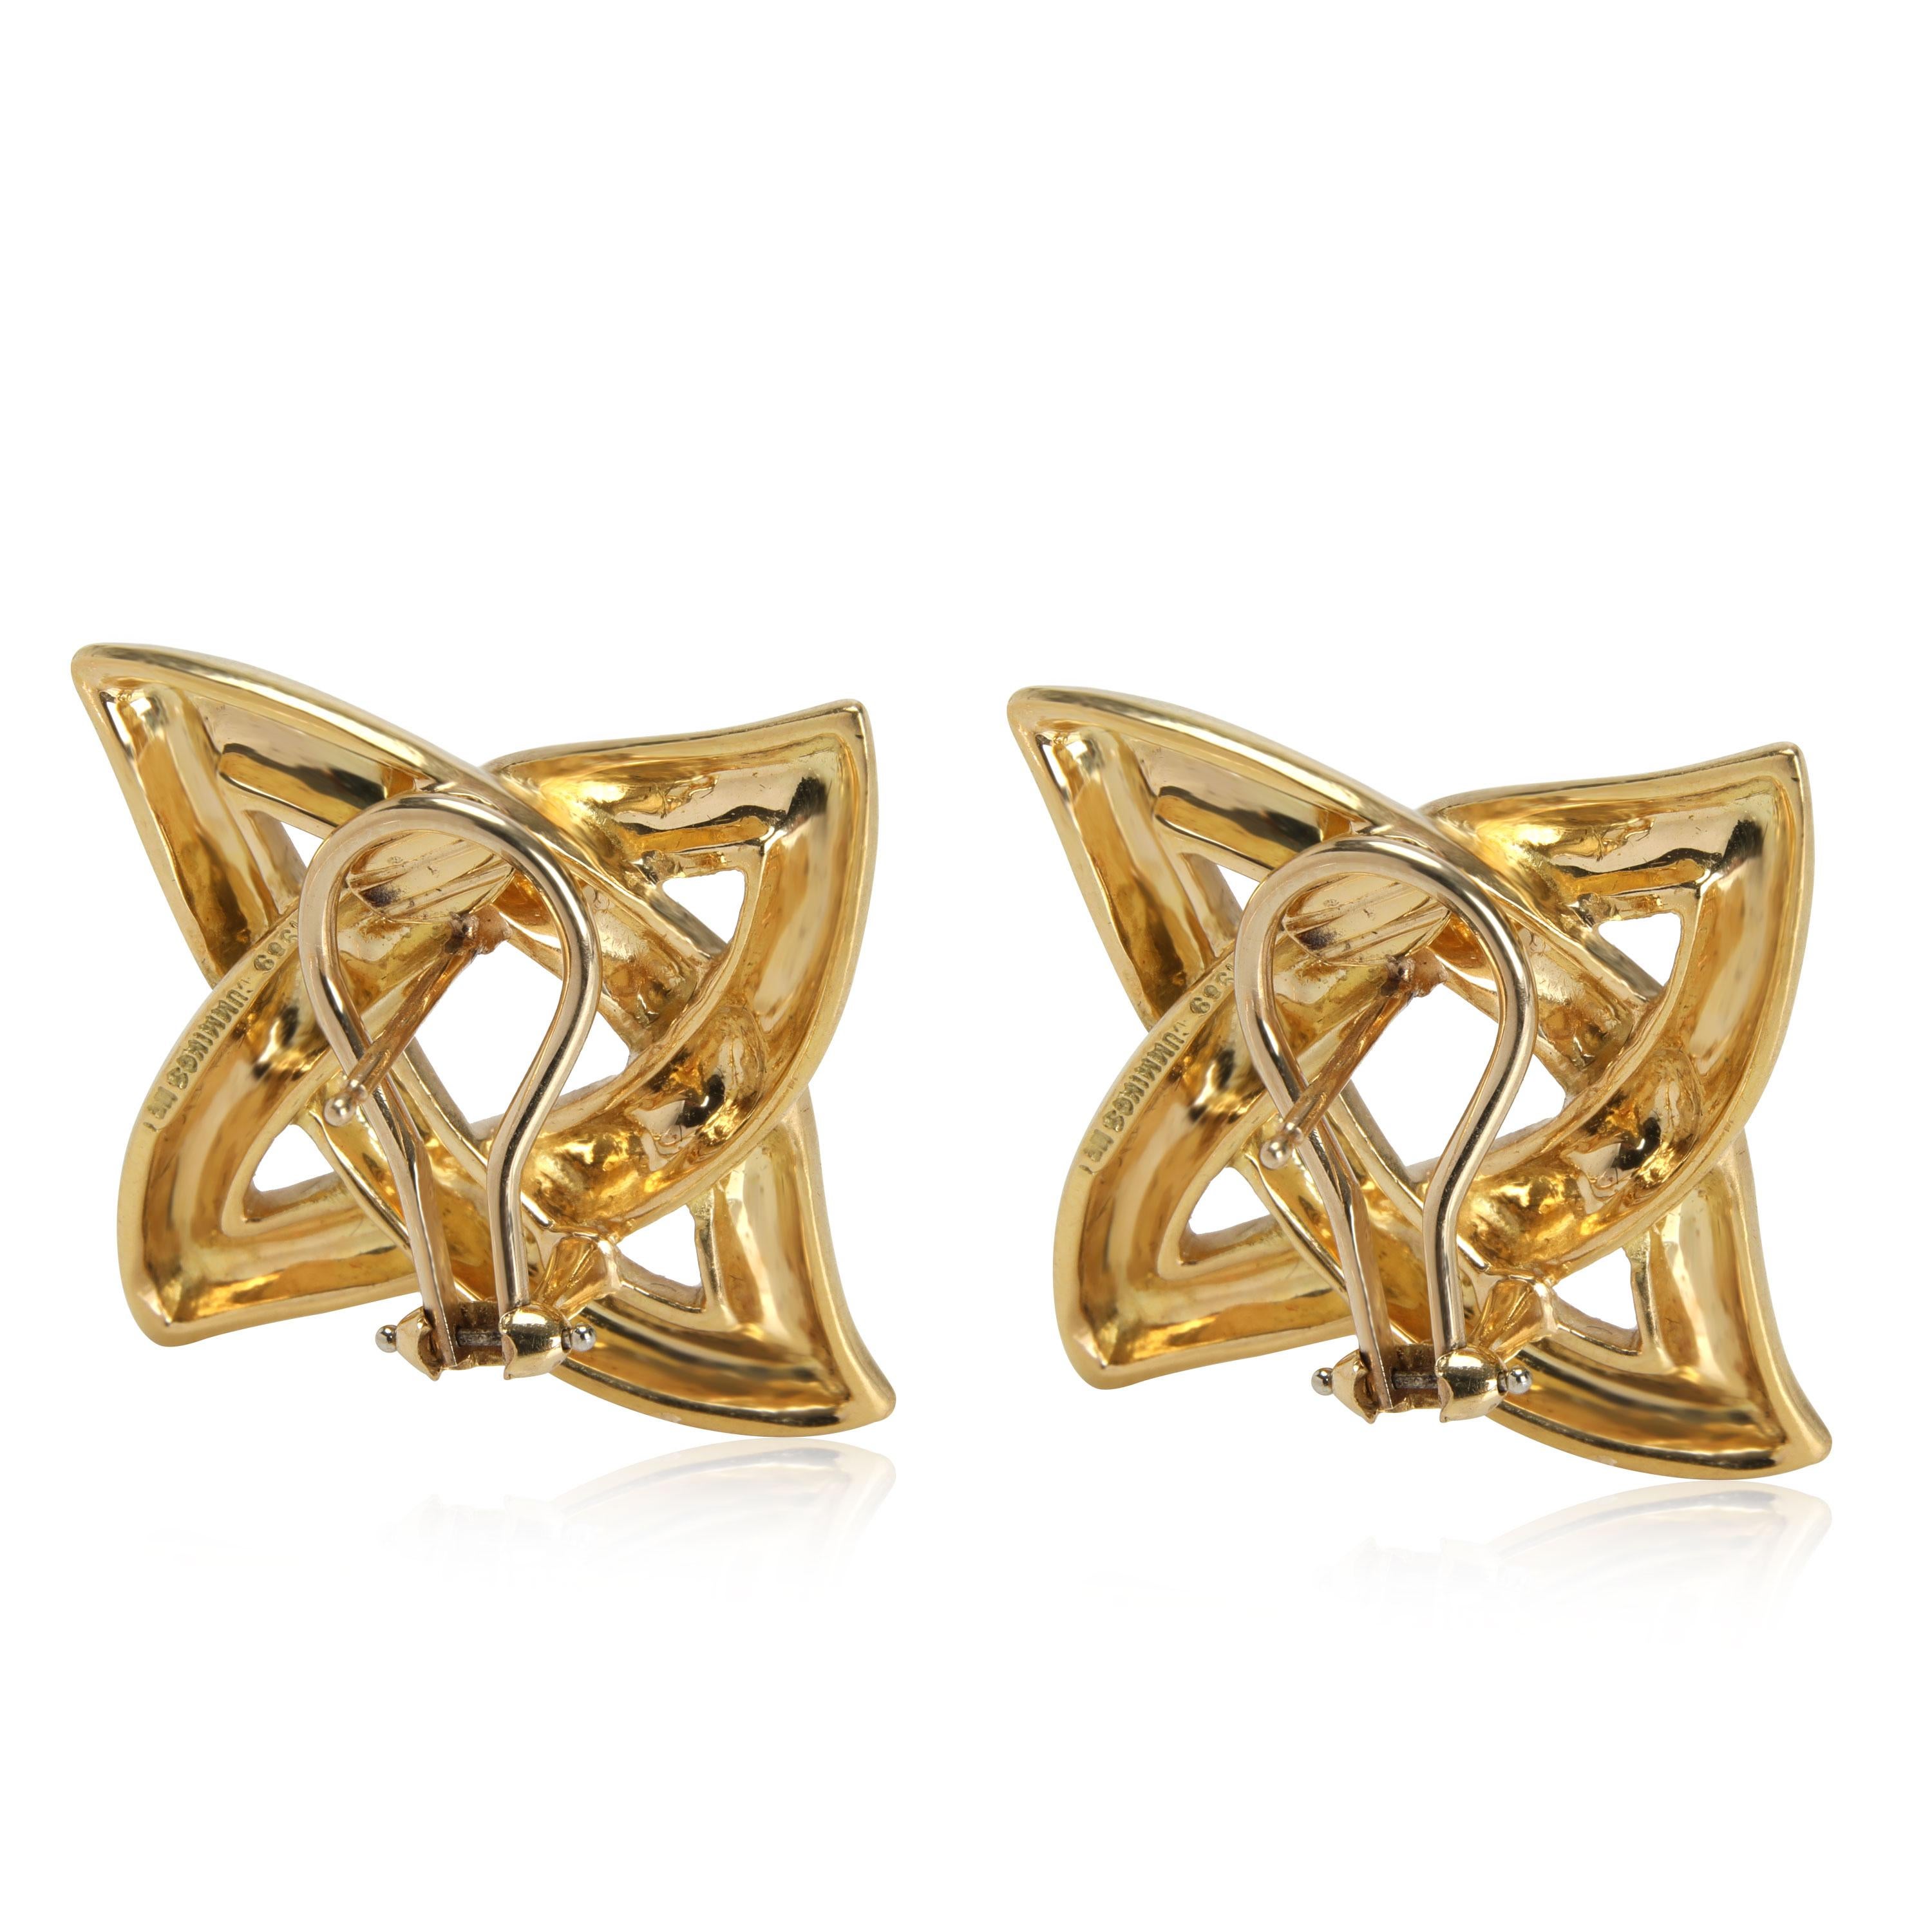 Angela Cummings Celtic Knot Earrings in 18K Yellow Gold

PRIMARY DETAILS
SKU: 113658
Listing Title: Angela Cummings Celtic Knot Earrings in 18K Yellow Gold
Condition Description: Retails for 6000 USD. In excellent condition and recently